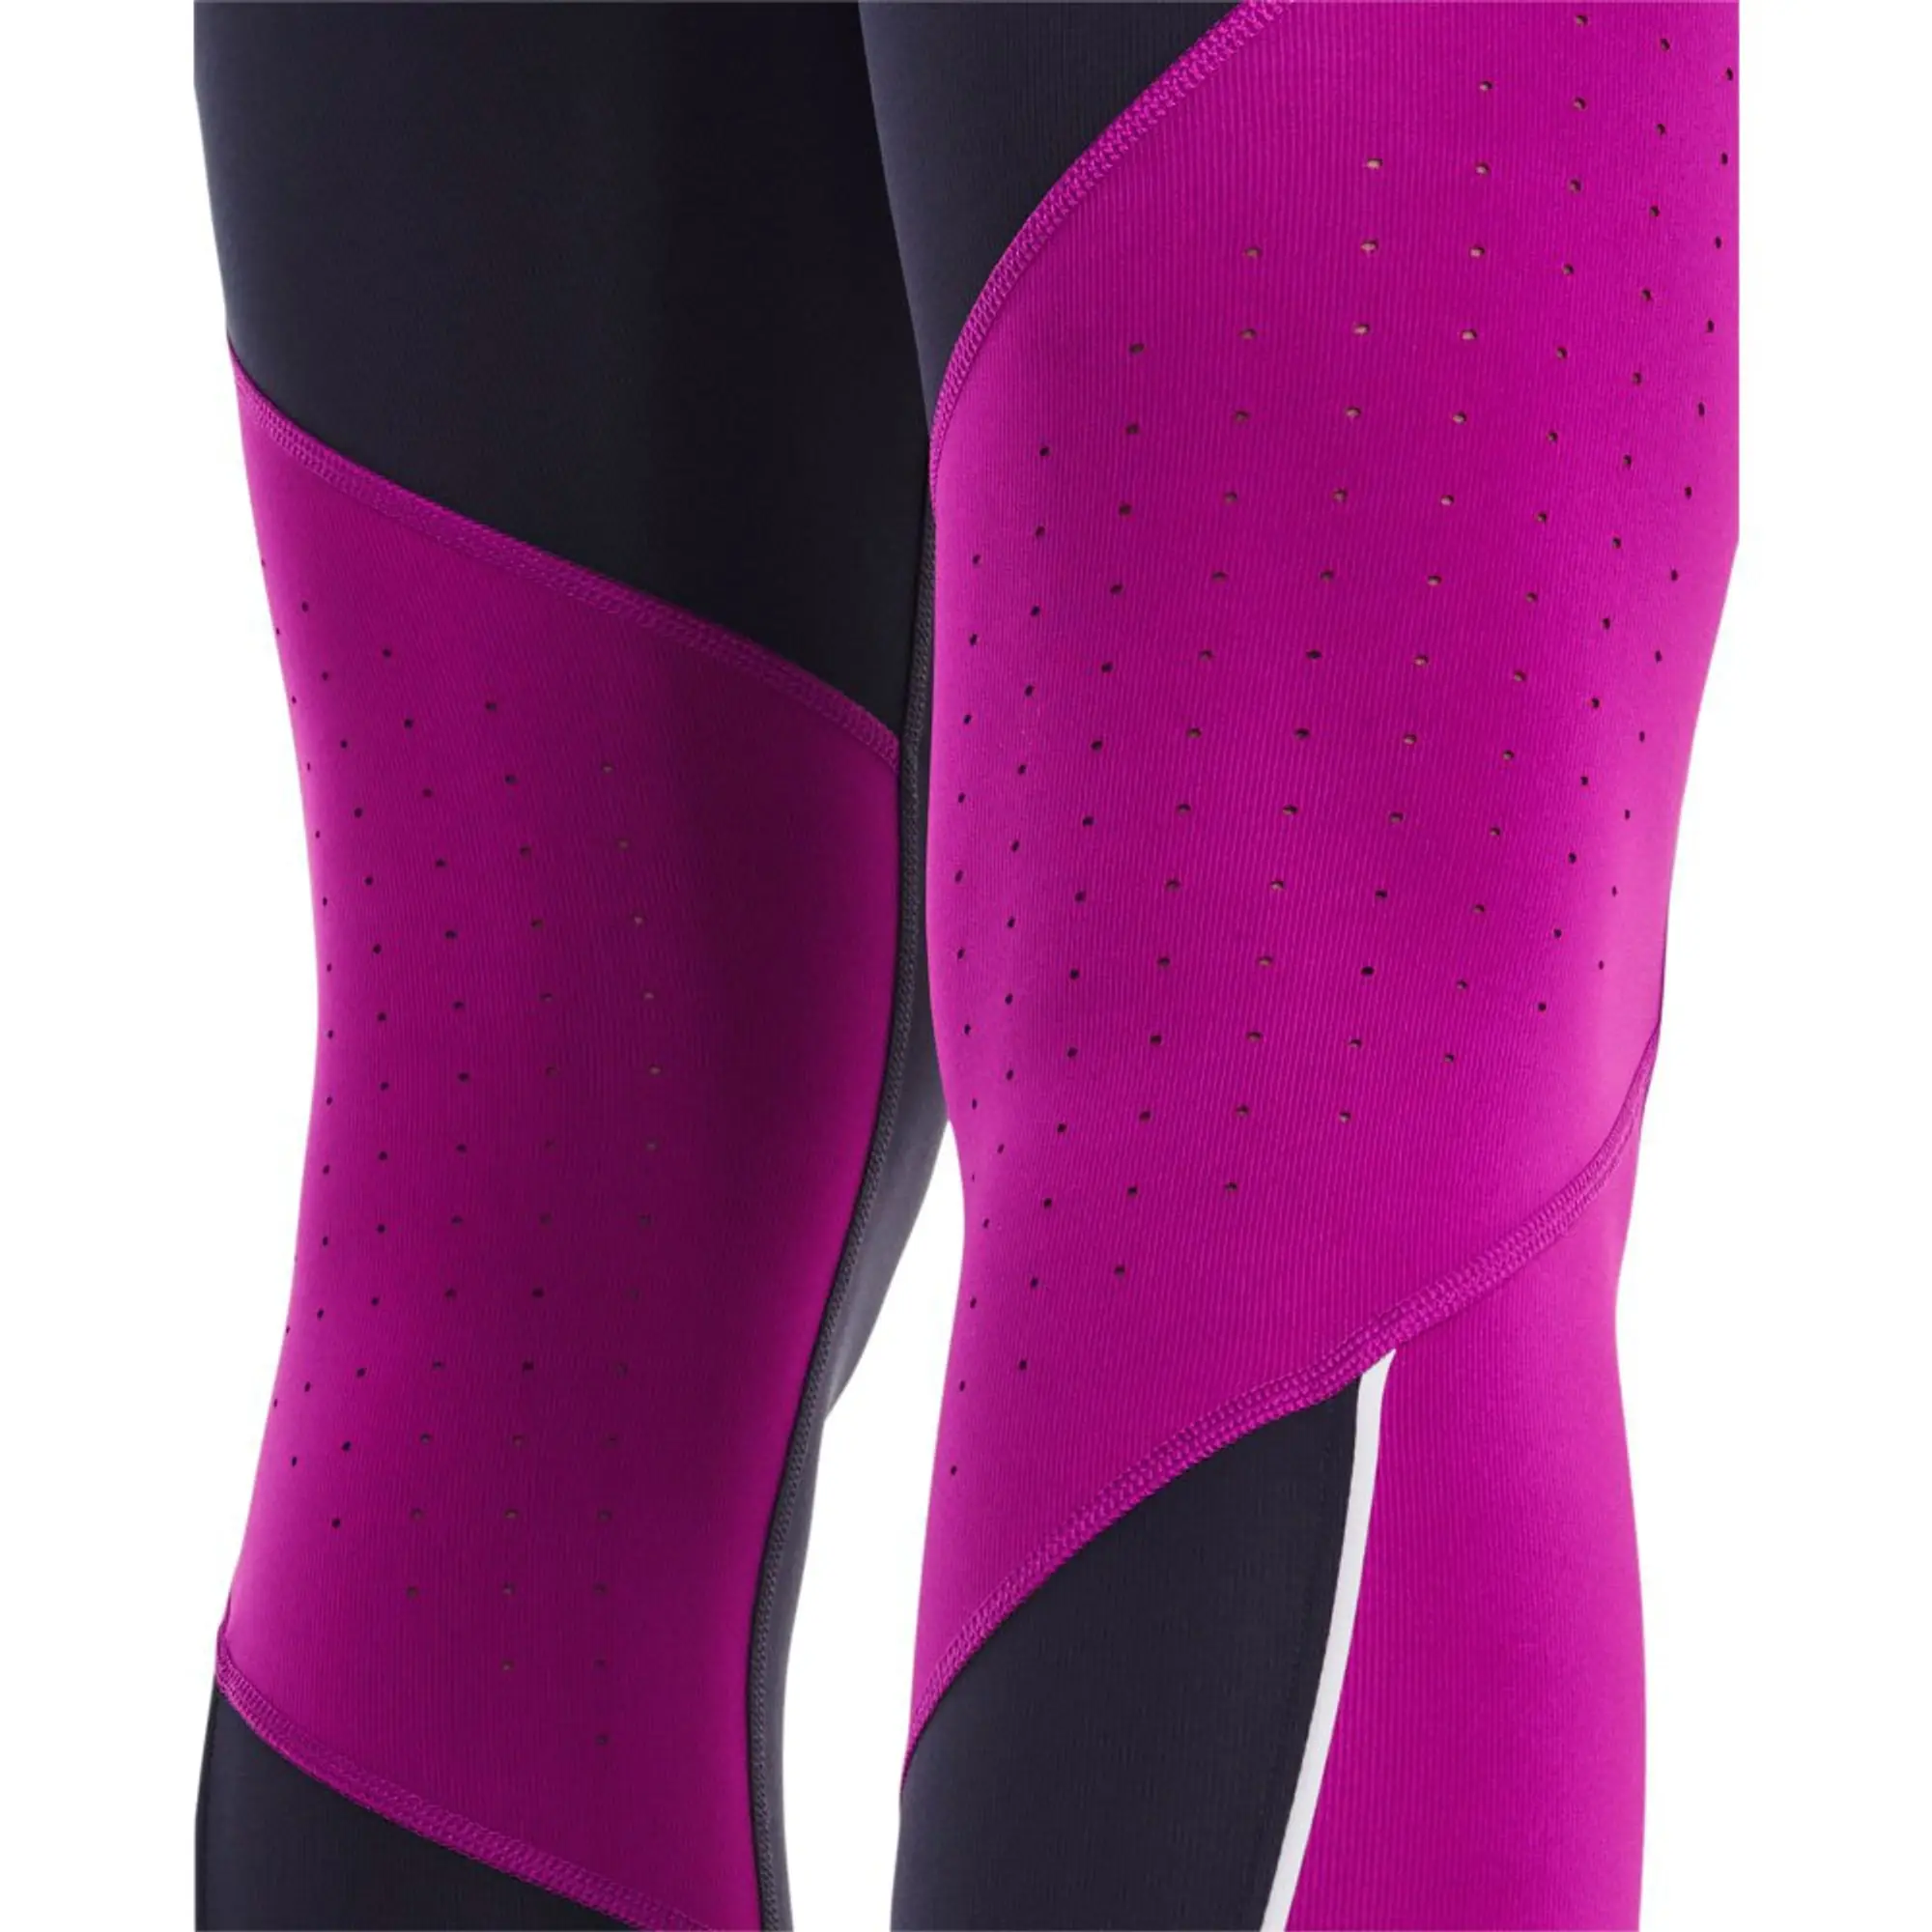 Women's Armour Novelty Ankle Legging from Under Armour